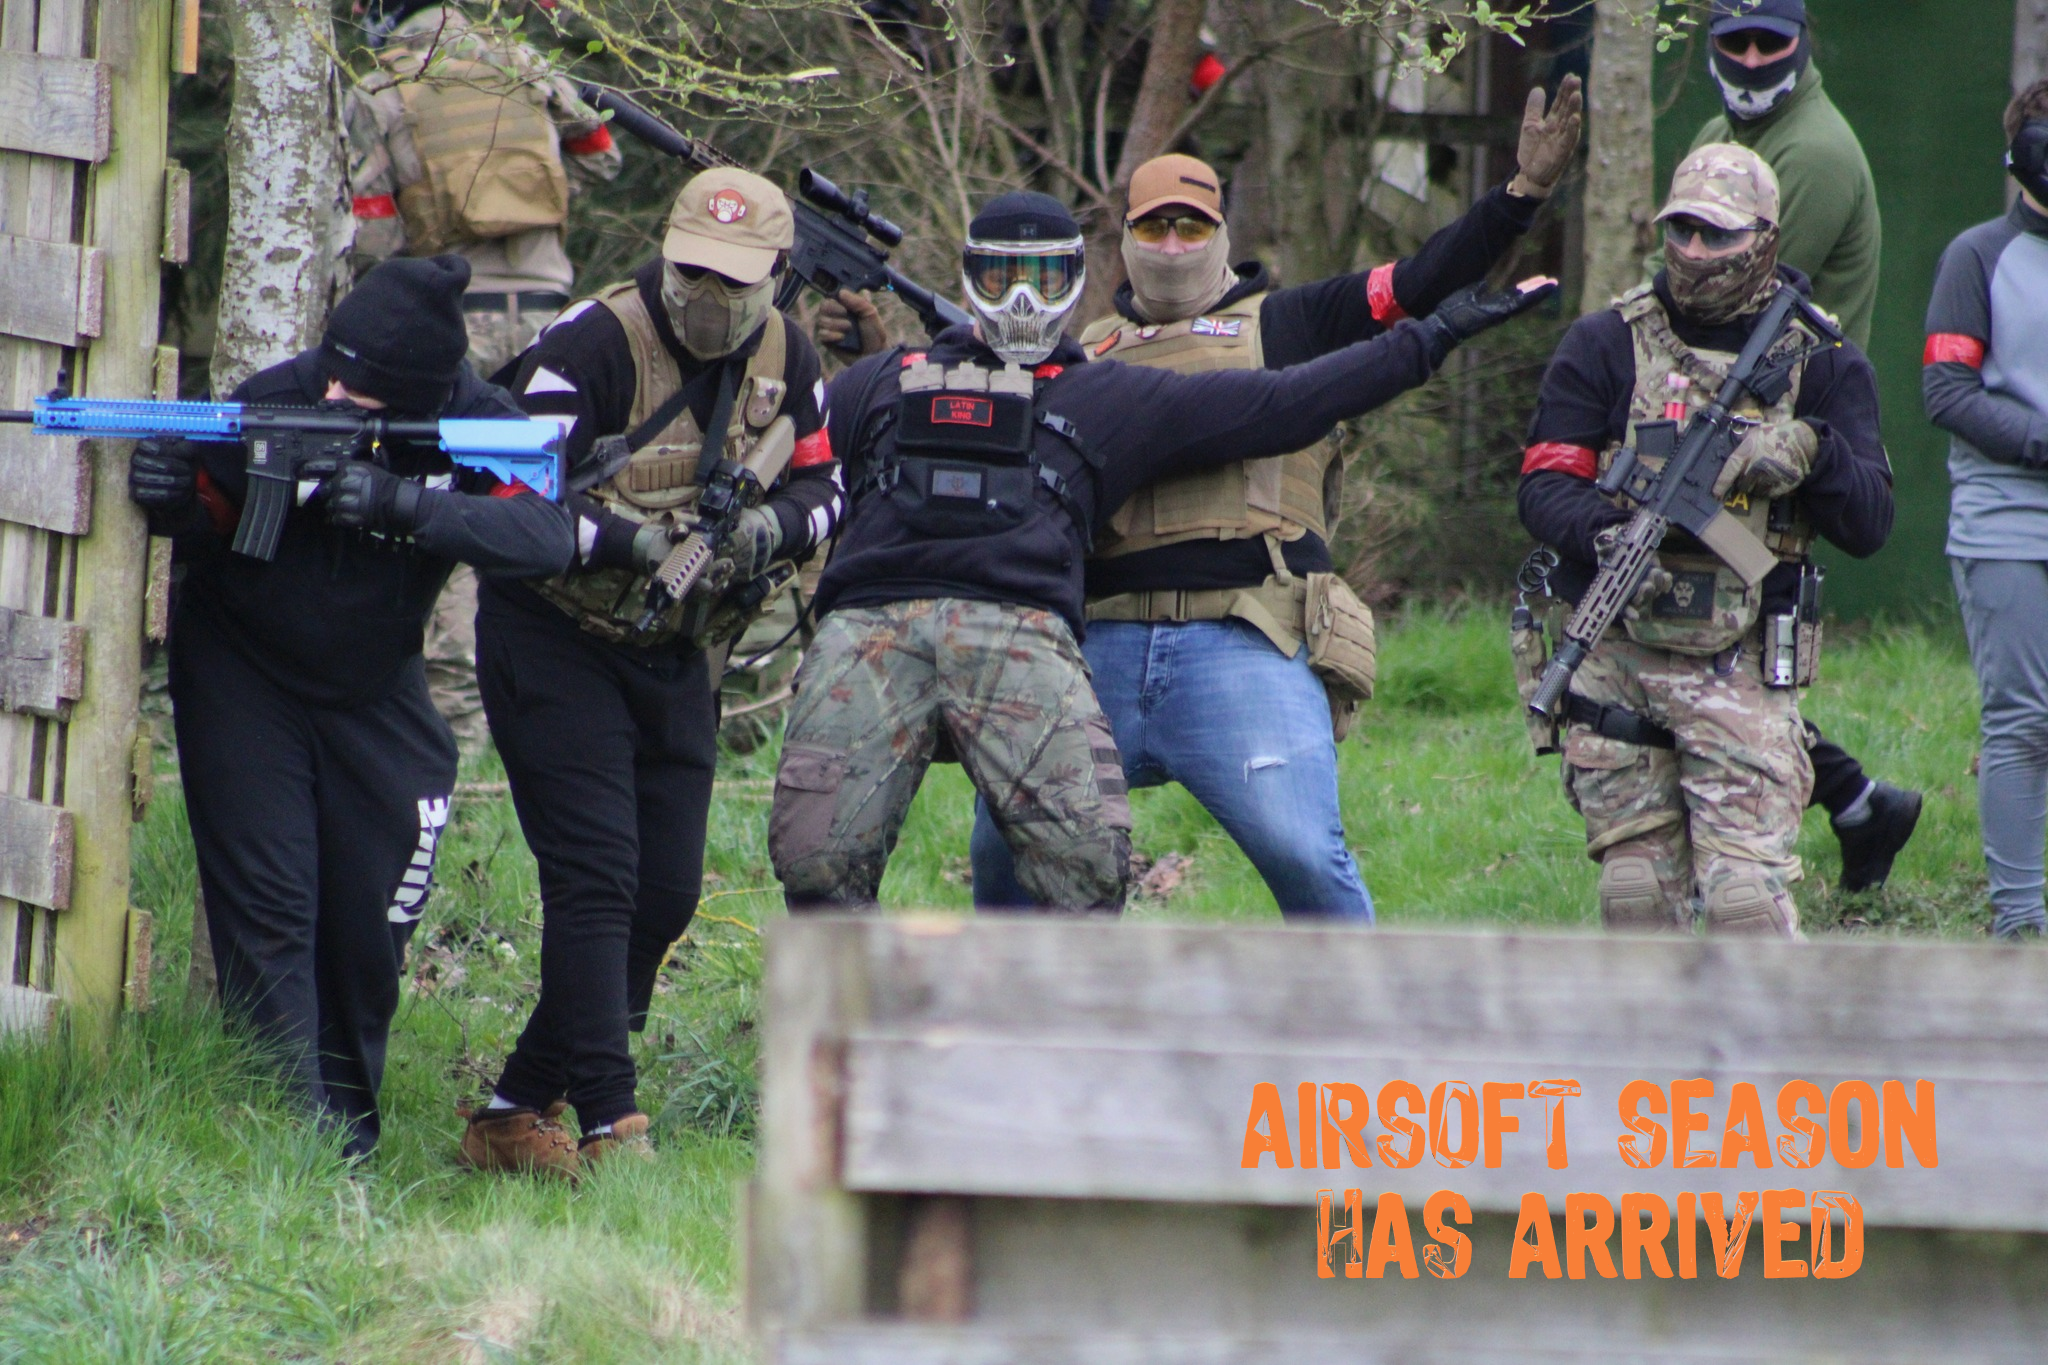 AIRSOFT SEASON HAS ARRIVED!